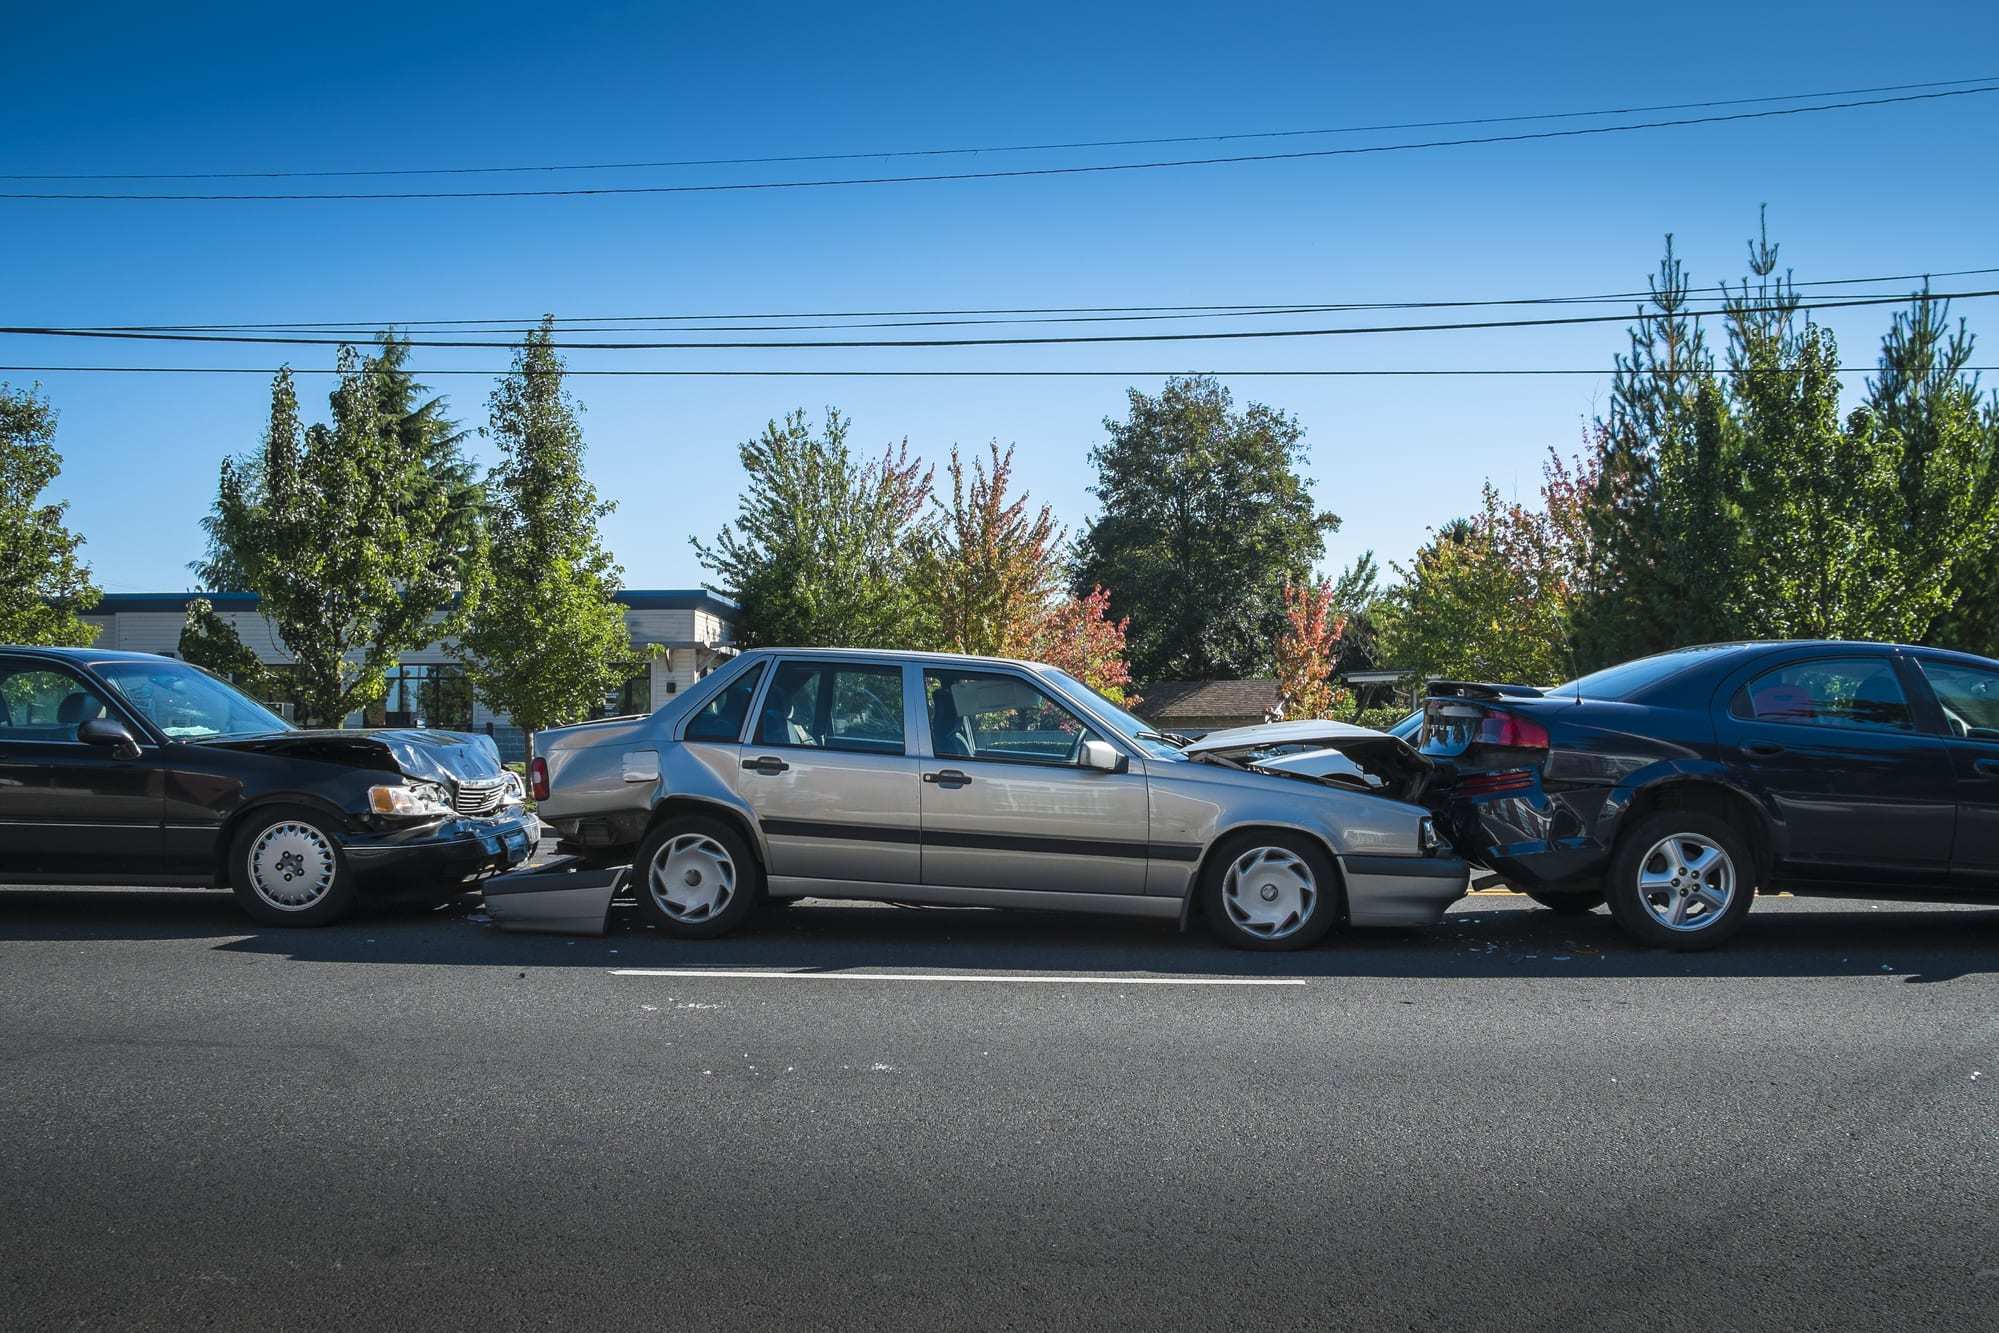 Three cars involved in an accident on a city street